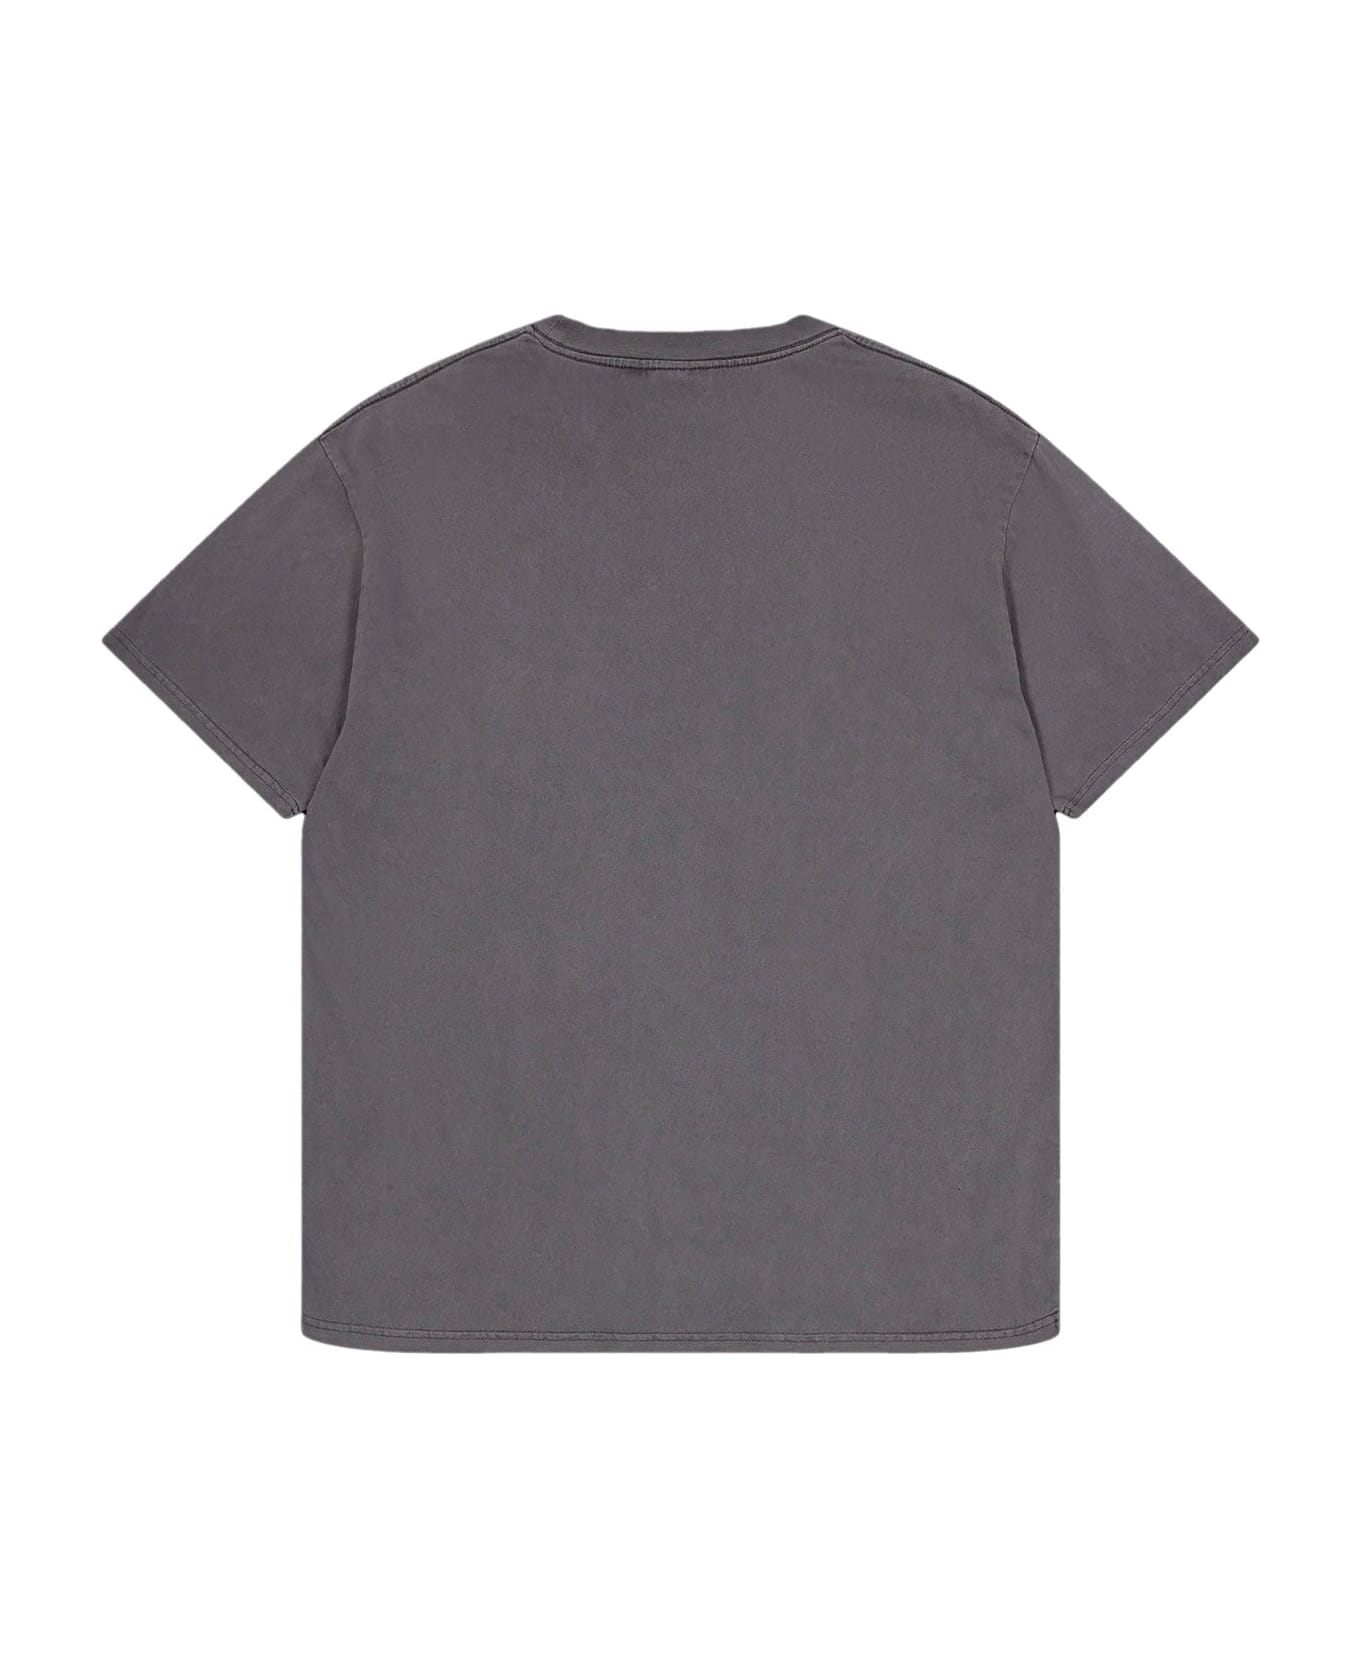 Gramicci One Point Tee - Grey Pigment